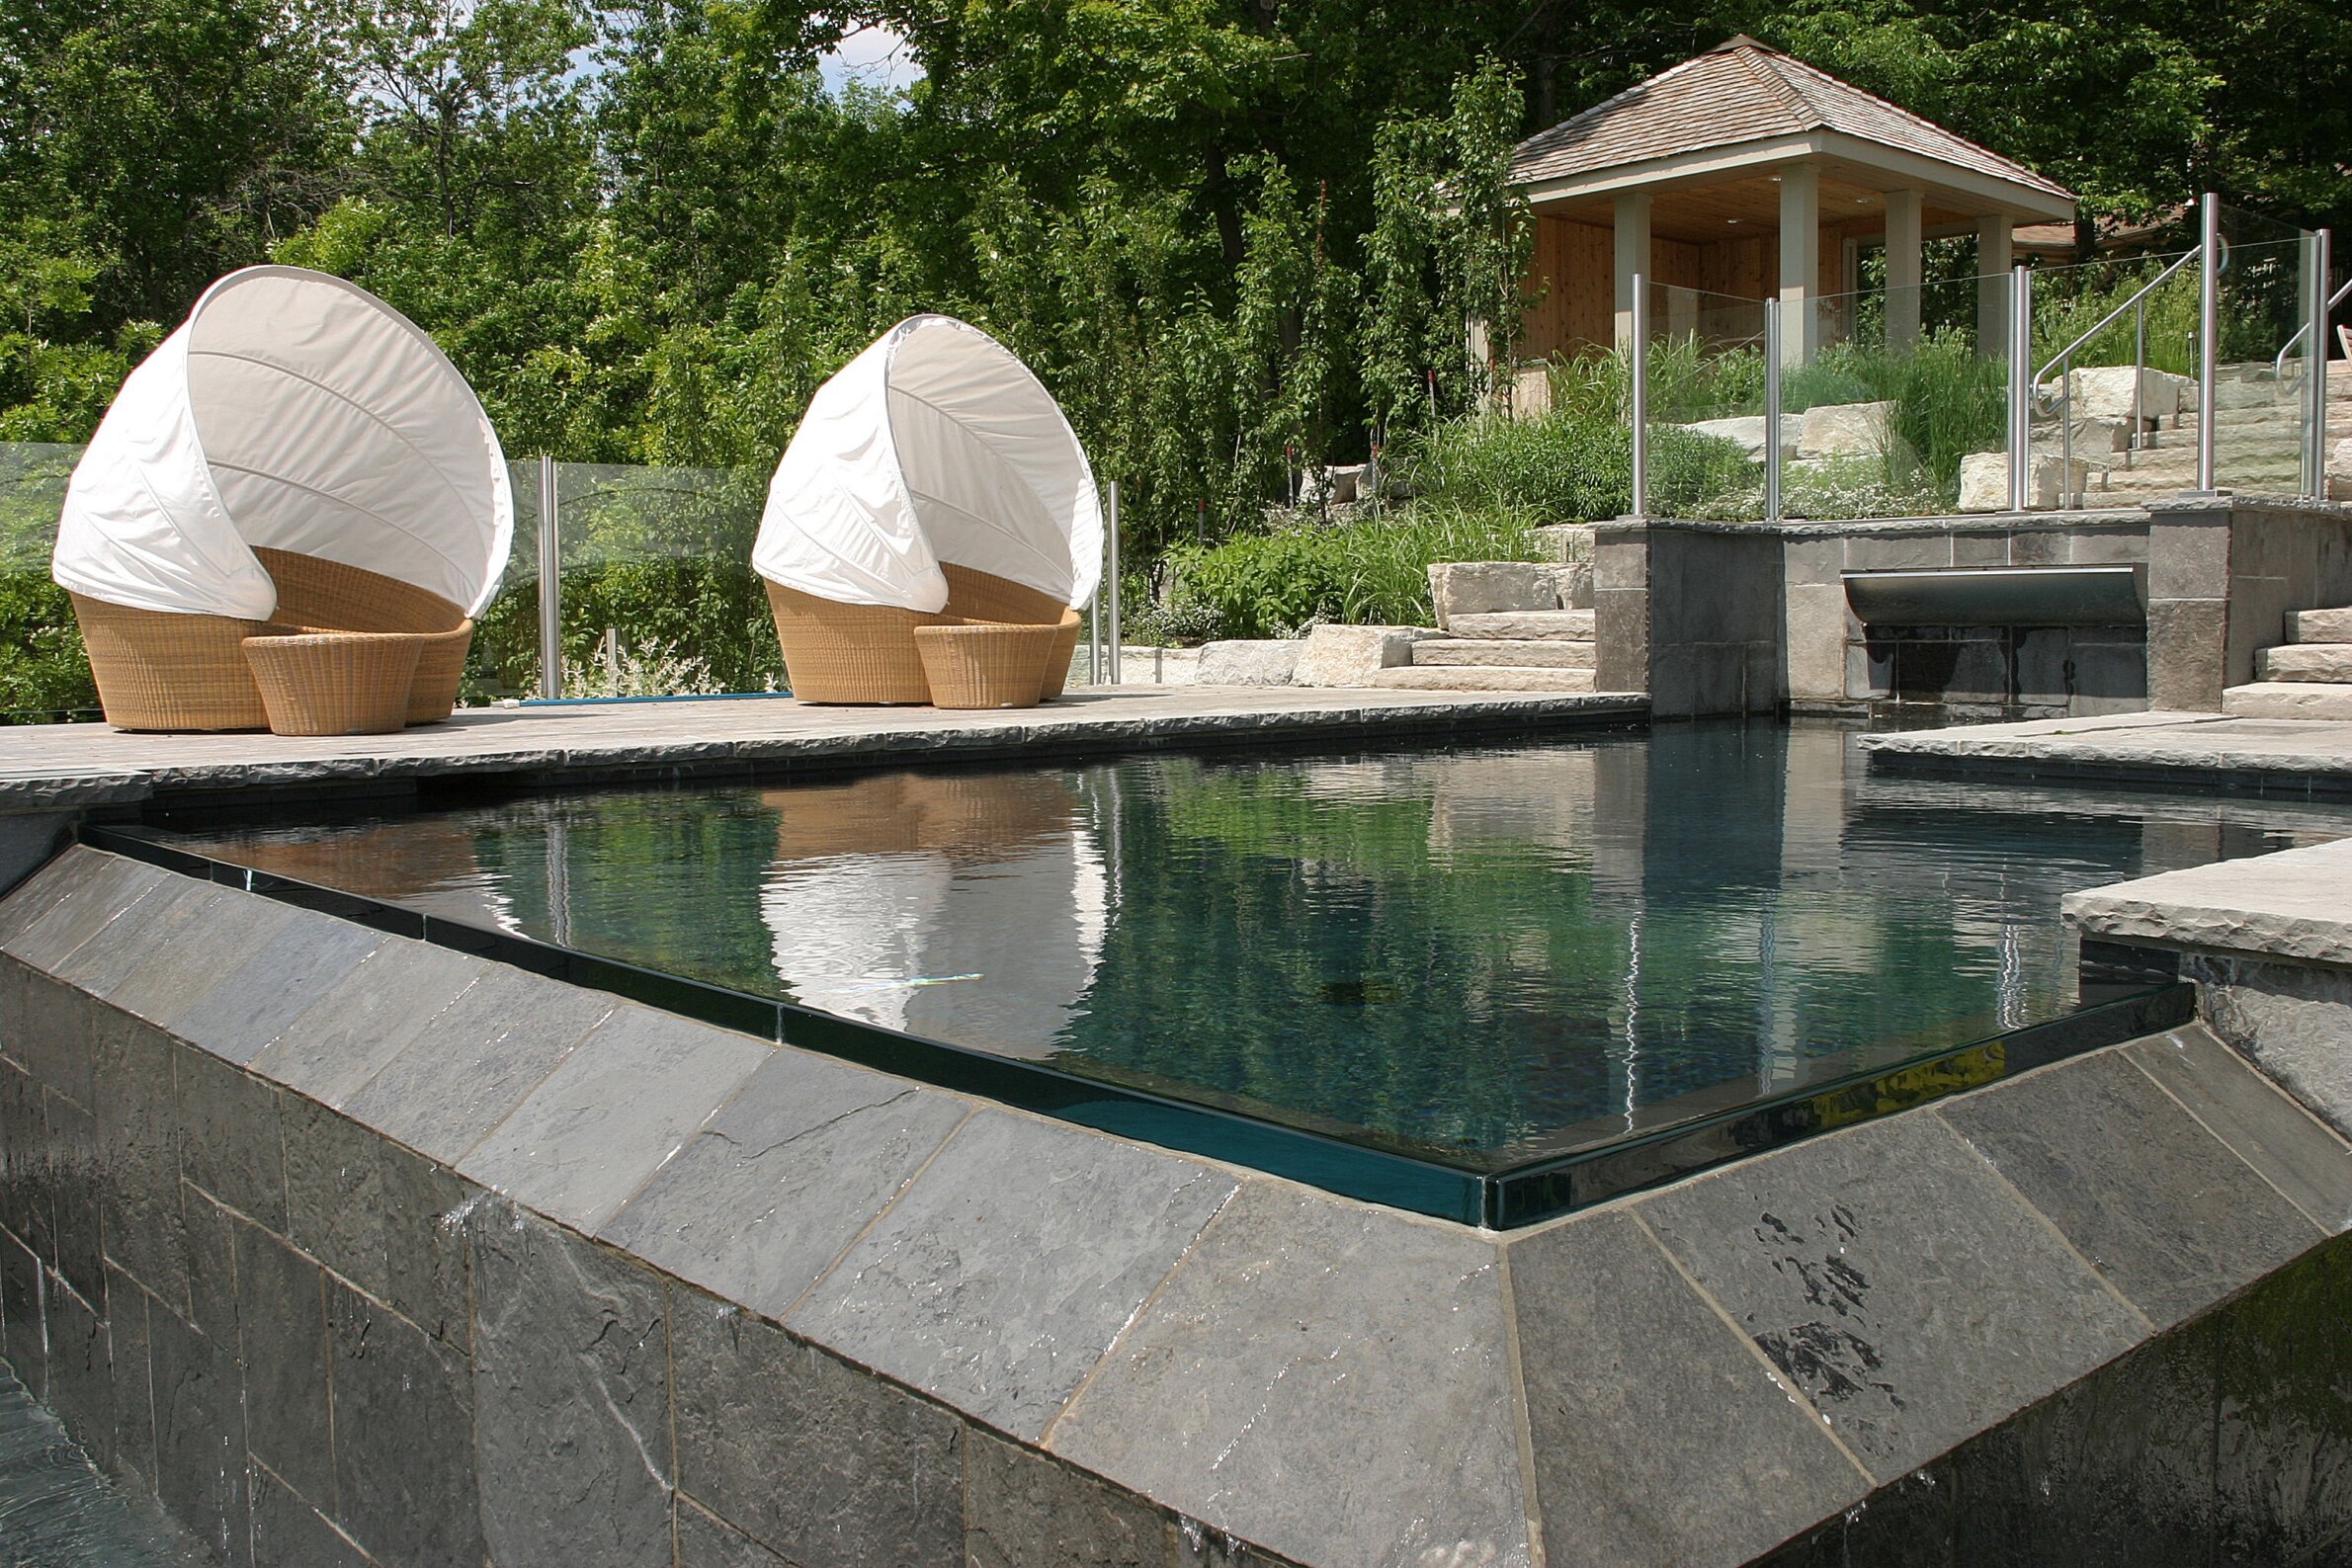 An outdoor pool with dark tiles reflects trees and sky, featuring two clamshell-shaped chairs on the deck and a stone fireplace nearby.